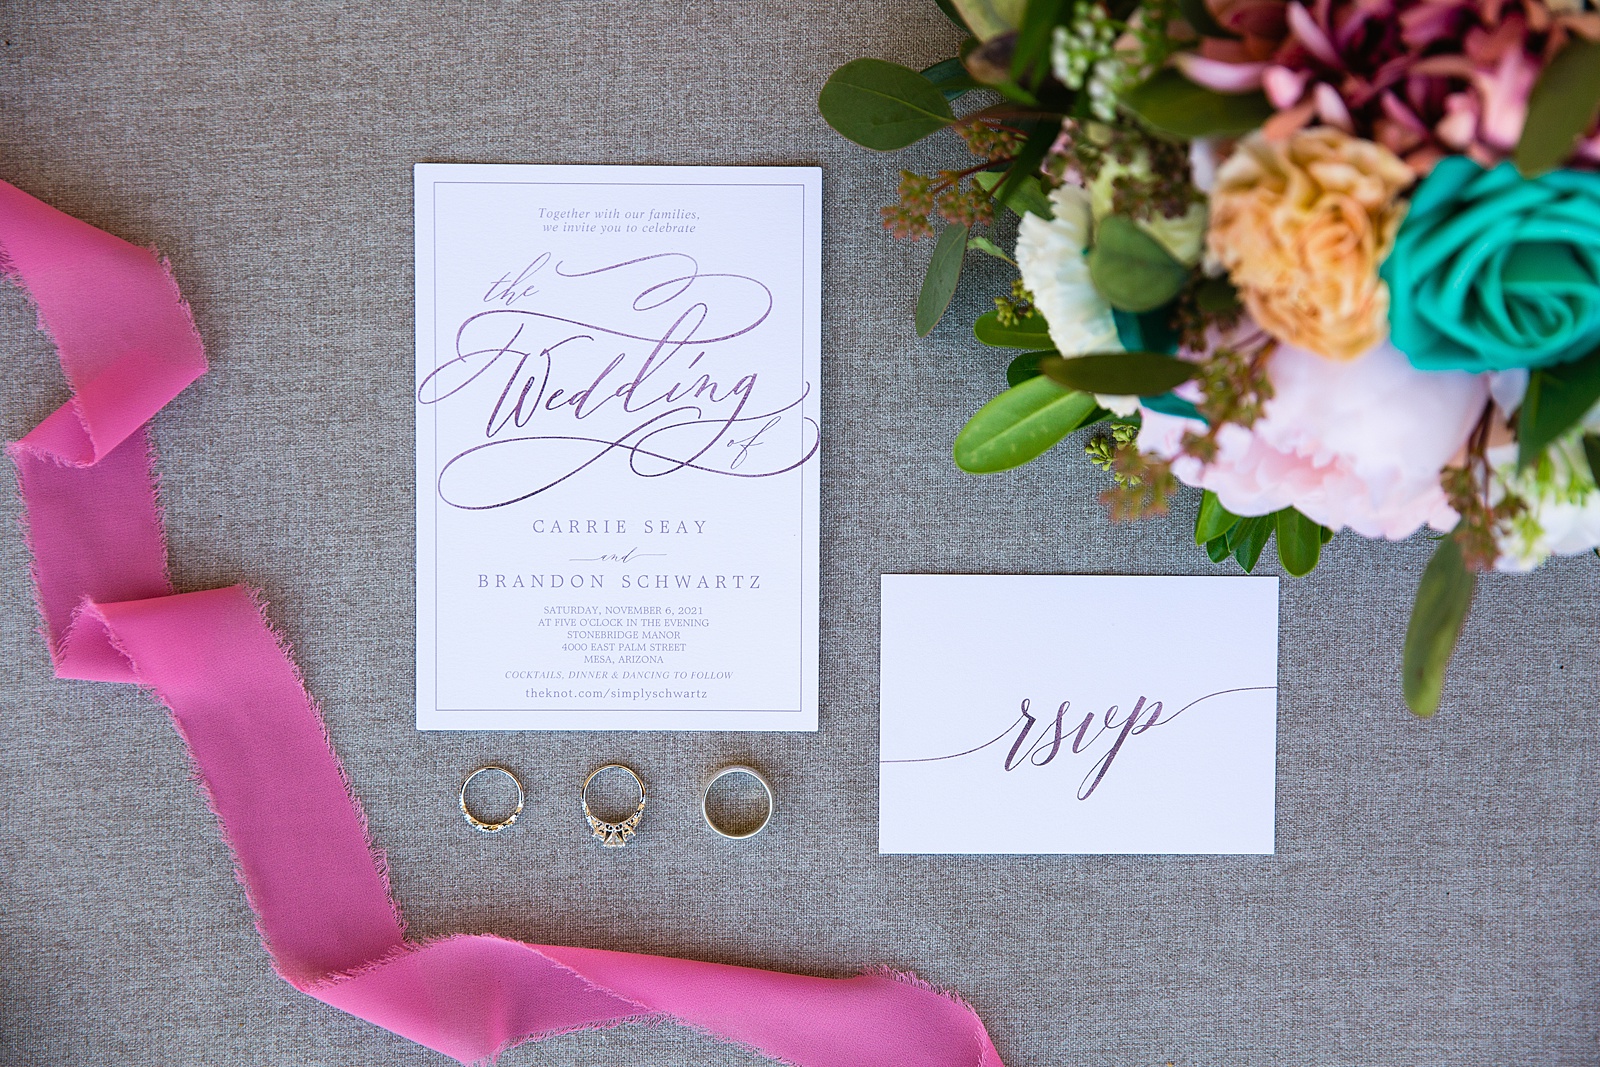 Romantic inspired pink and white wedding invitations with wedding rings by Arizona wedding photographer PMA Photography.